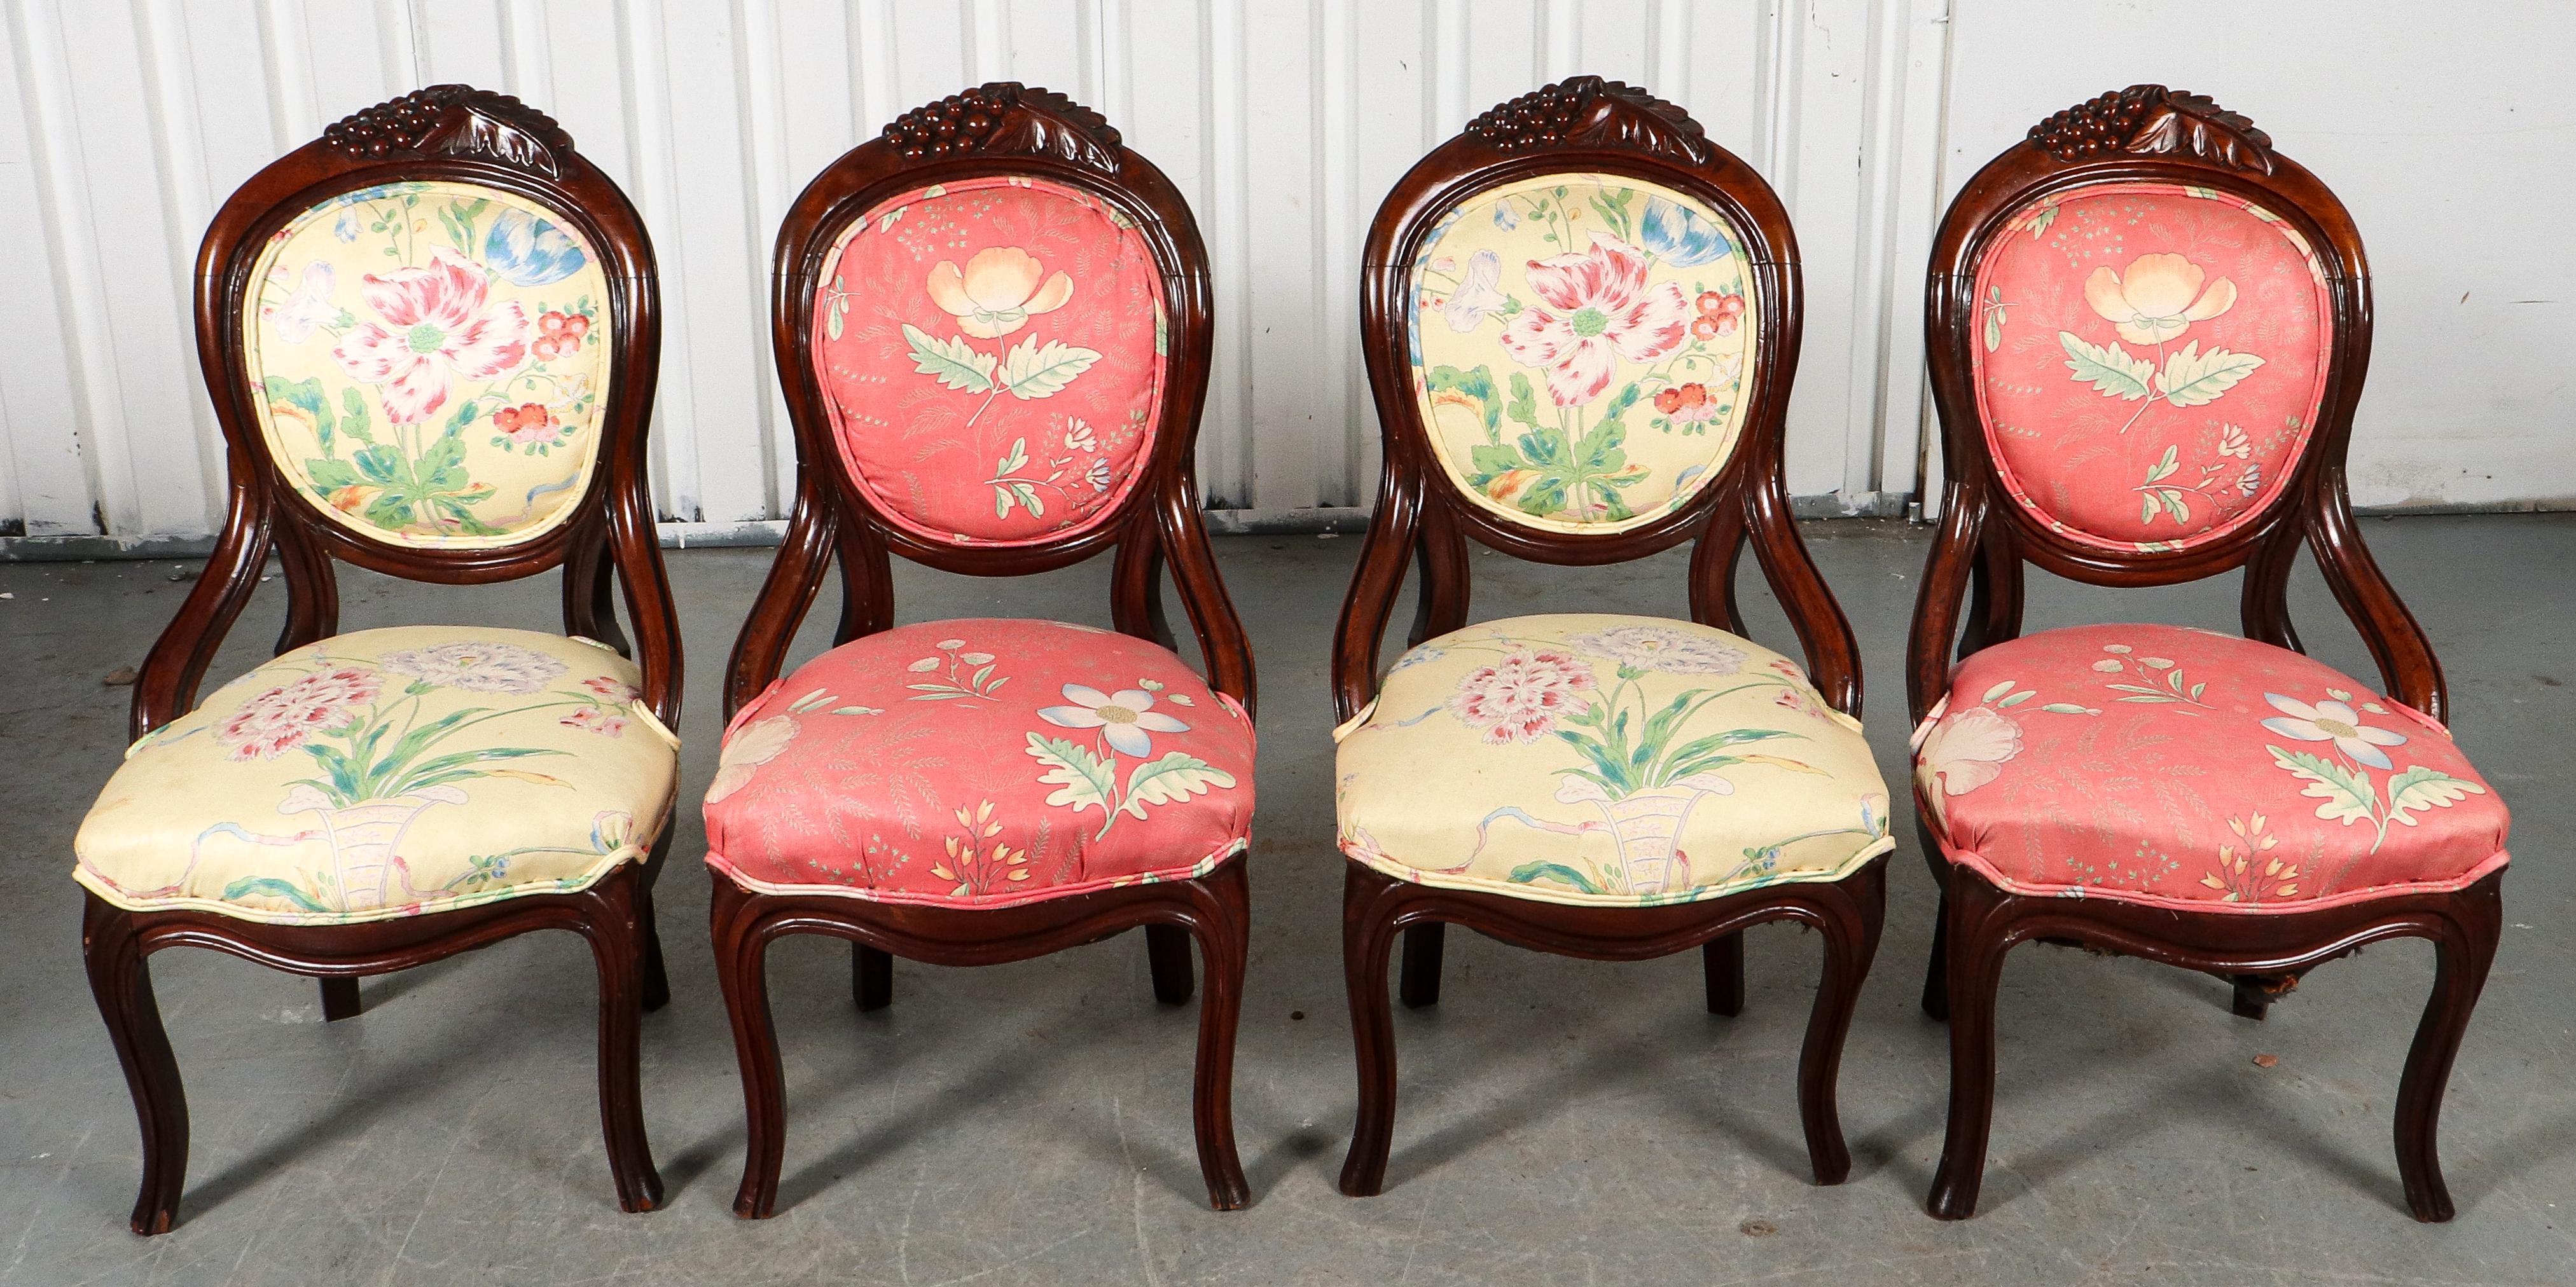 American Rococo Revival style set of four carved wood side chairs or dining chairs Belter style with carved grapes and vine leaves on top of upholstered back. 

Dealer: S138XX